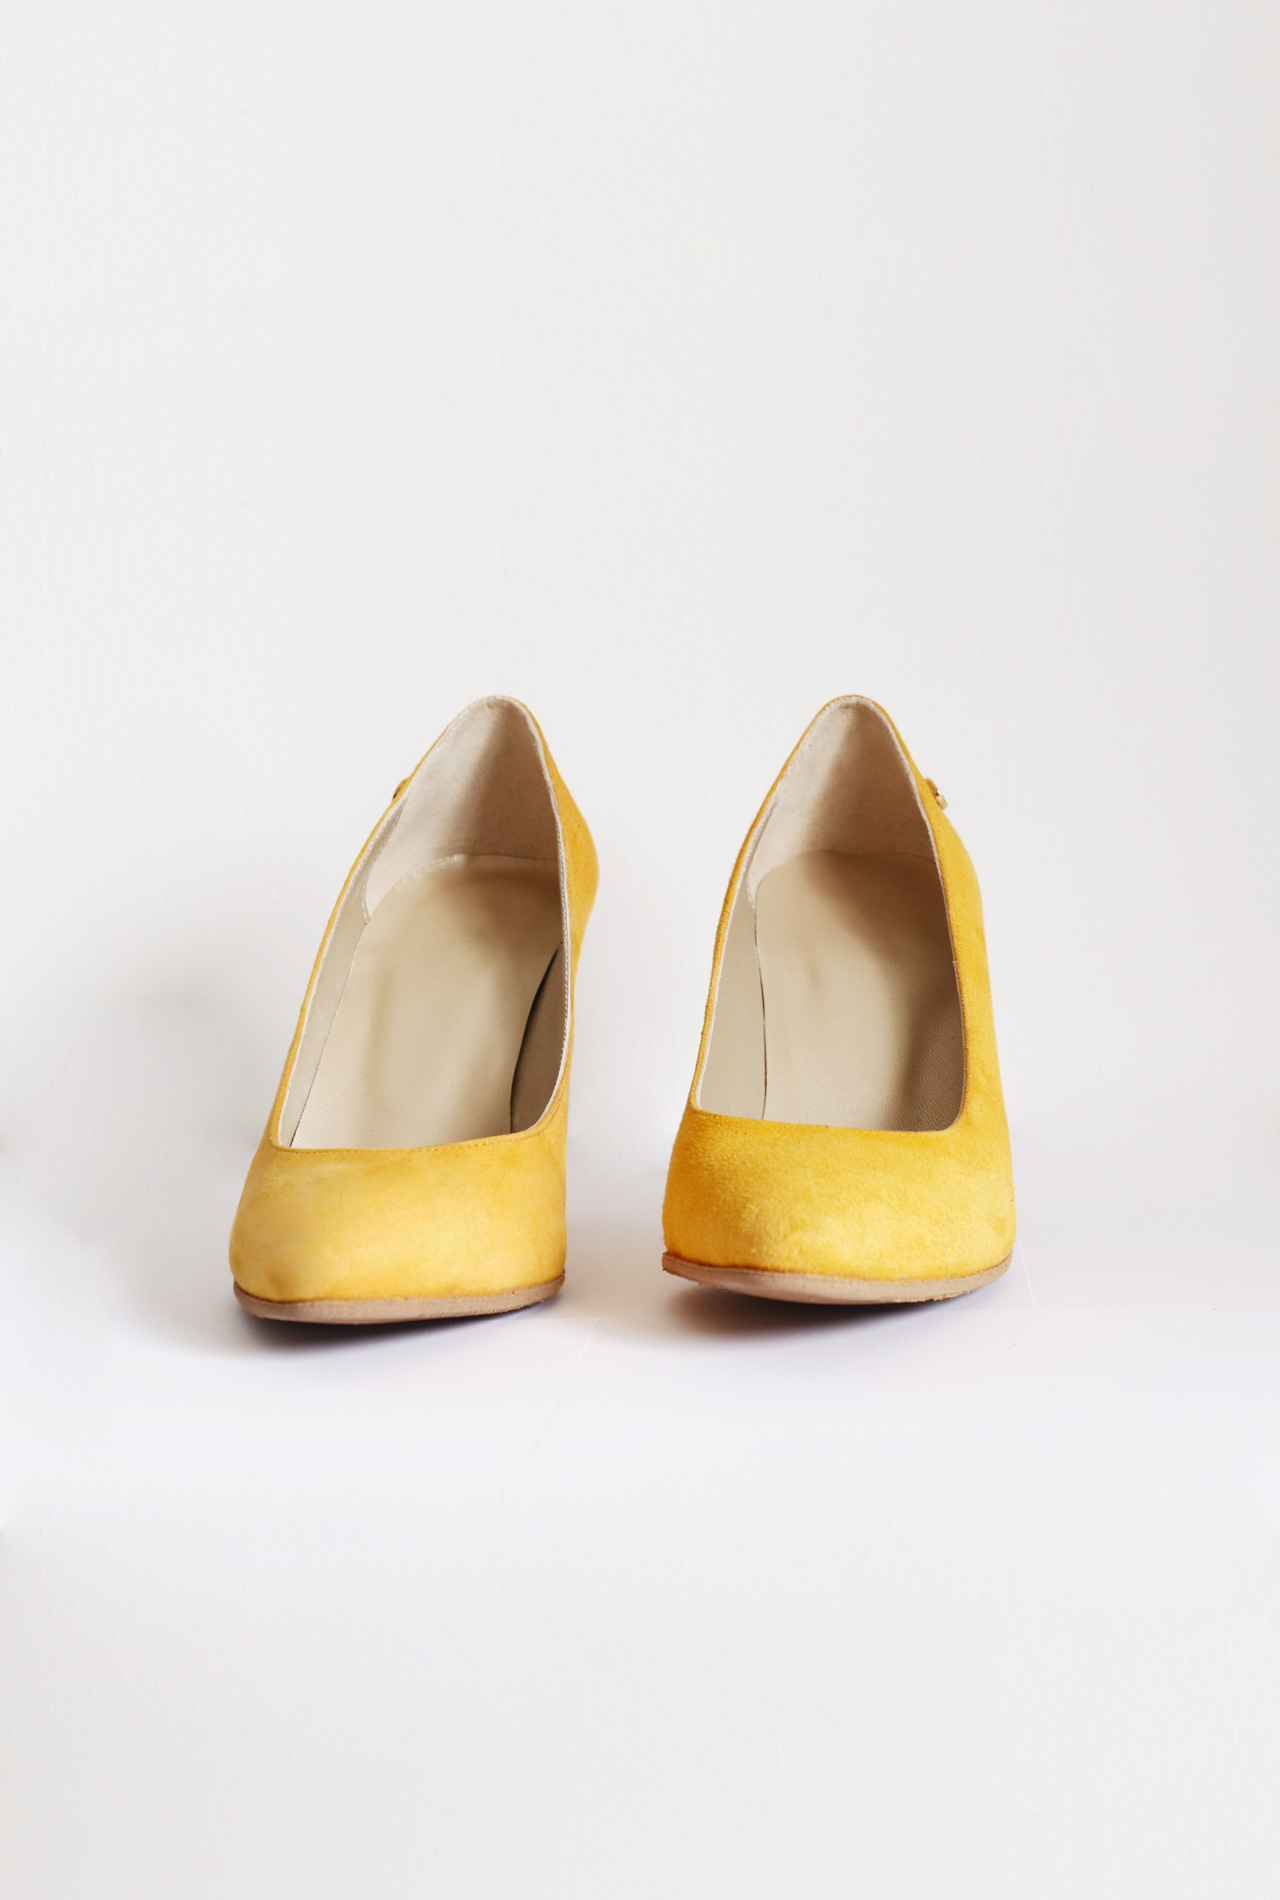 mustard colored shoes